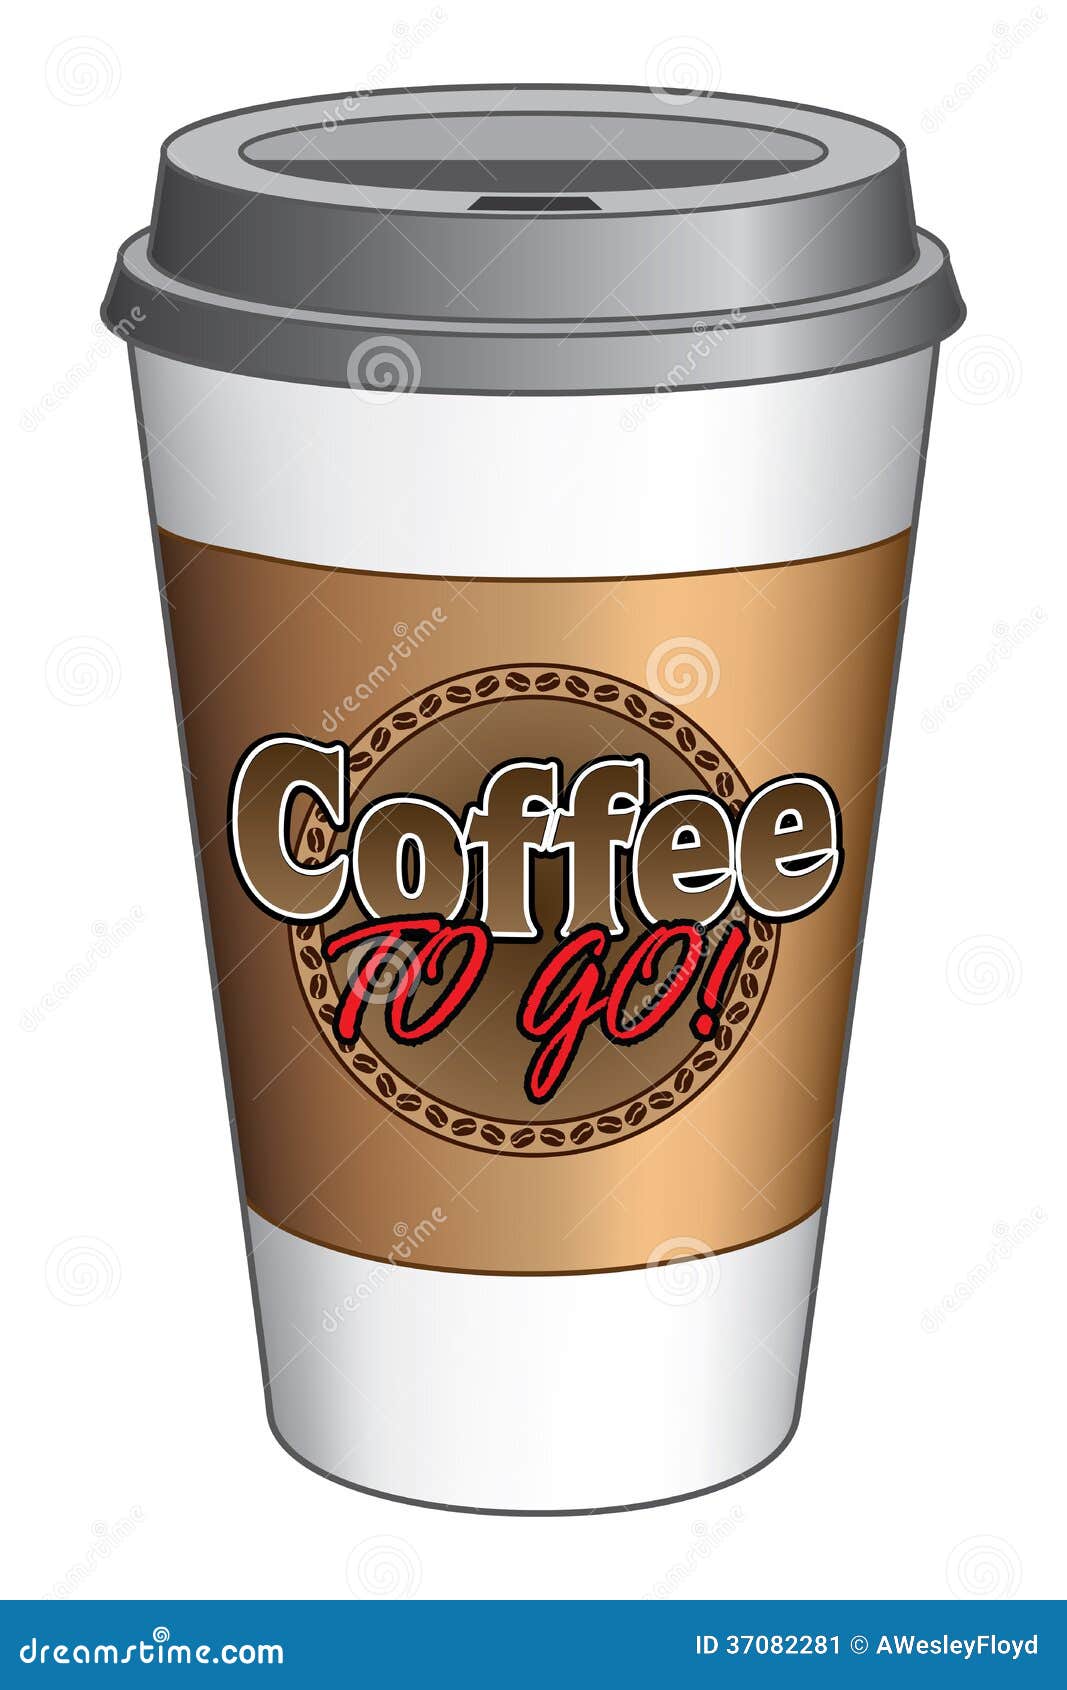 Coffee To Go Cup Stock Image - Image: 37082281